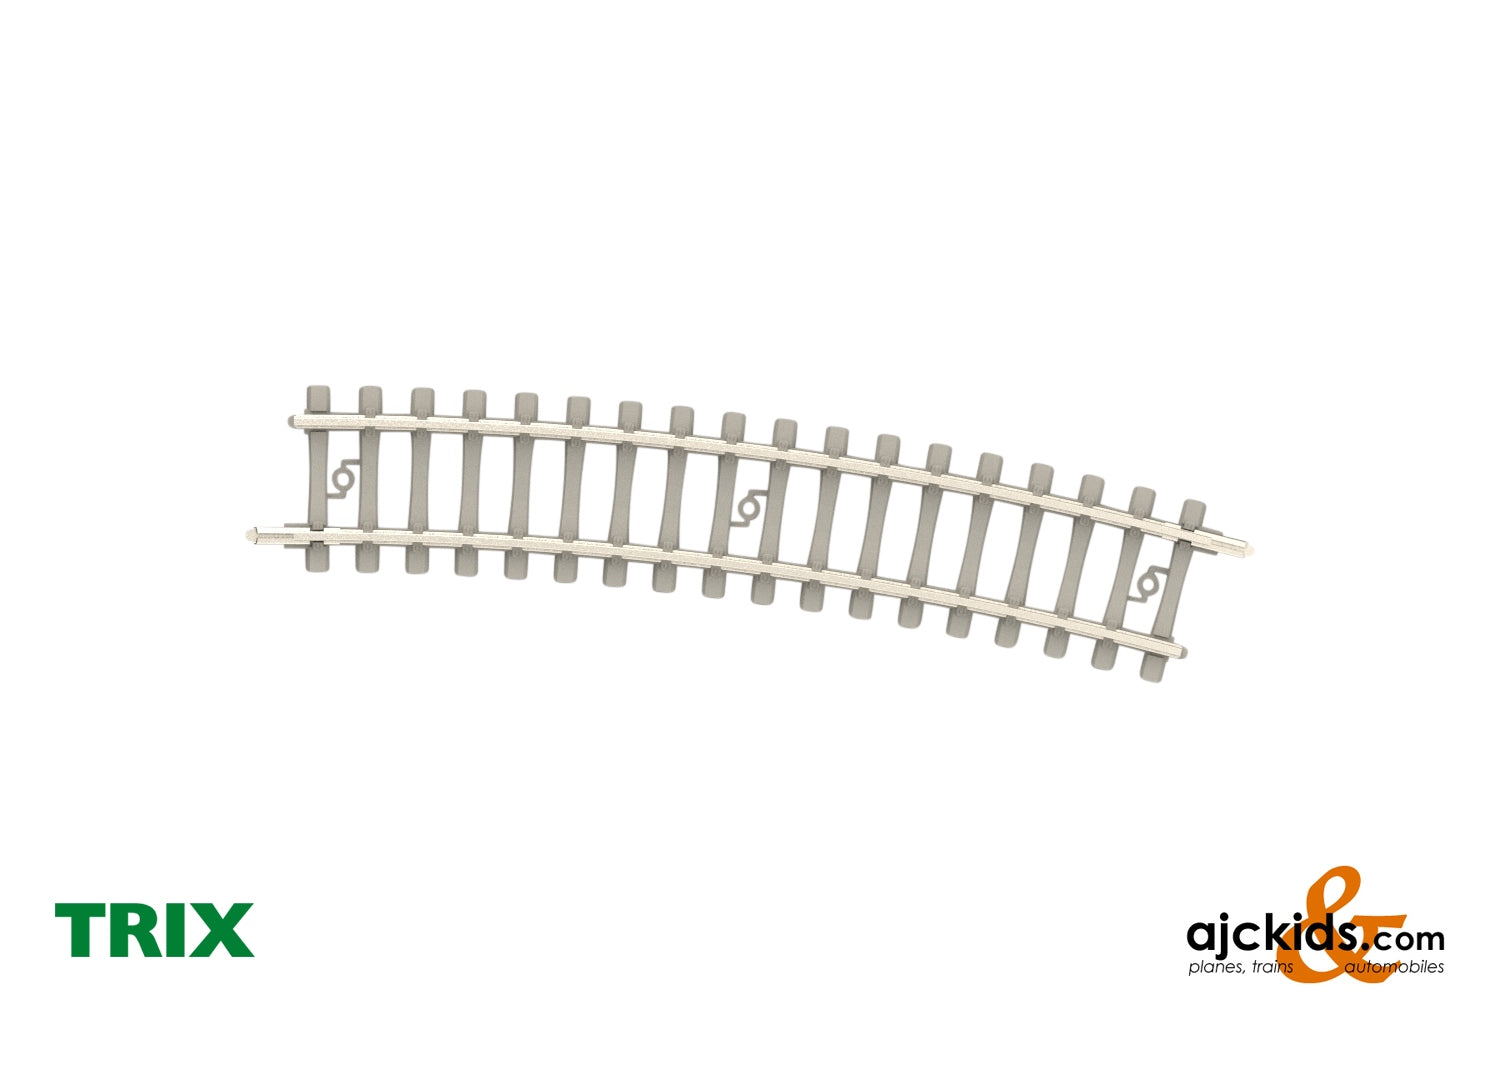 Trix 14521 - Curved Track with Concrete Ties